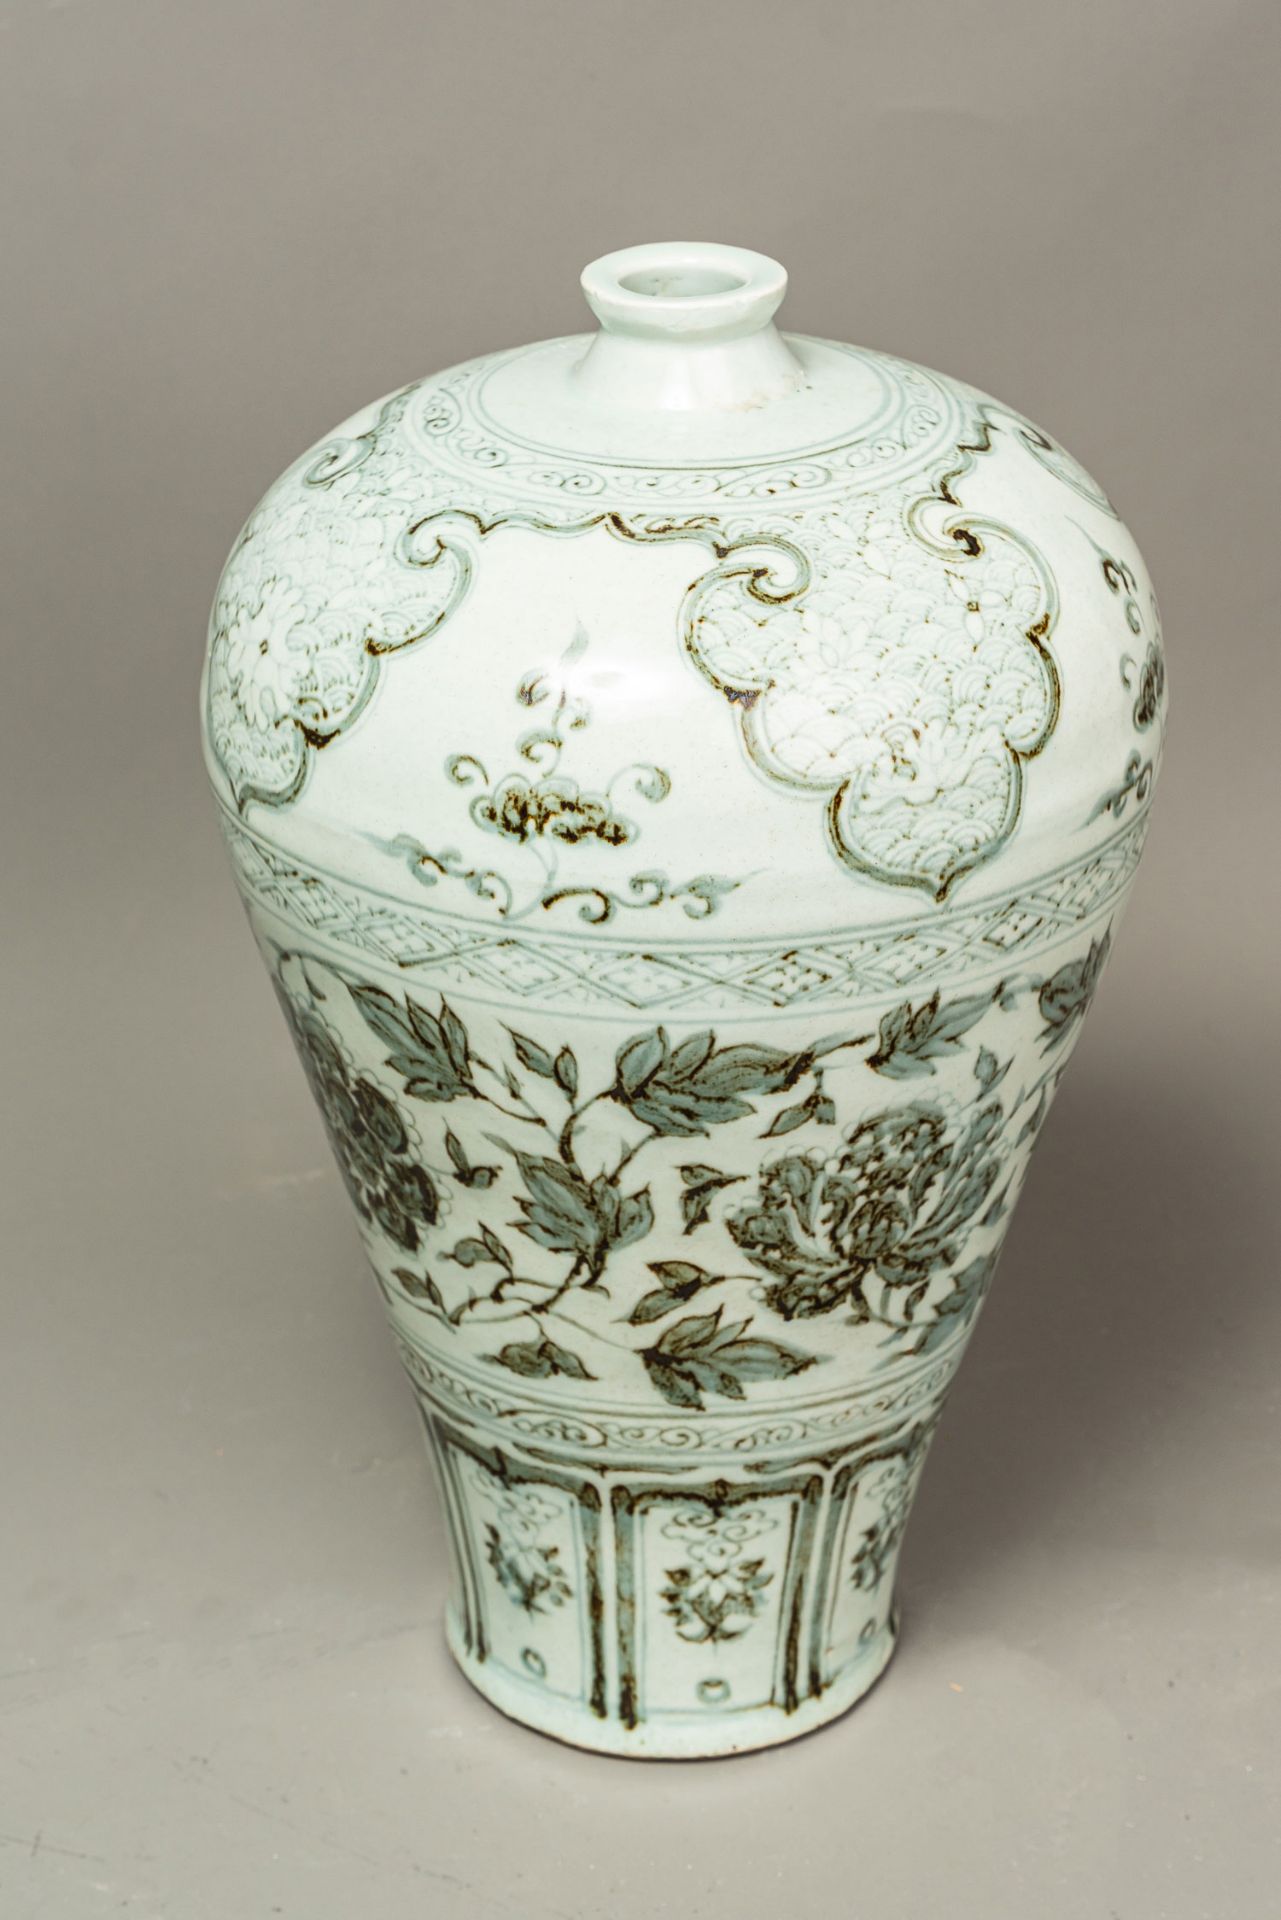 Chinese Mei-Ping Vase